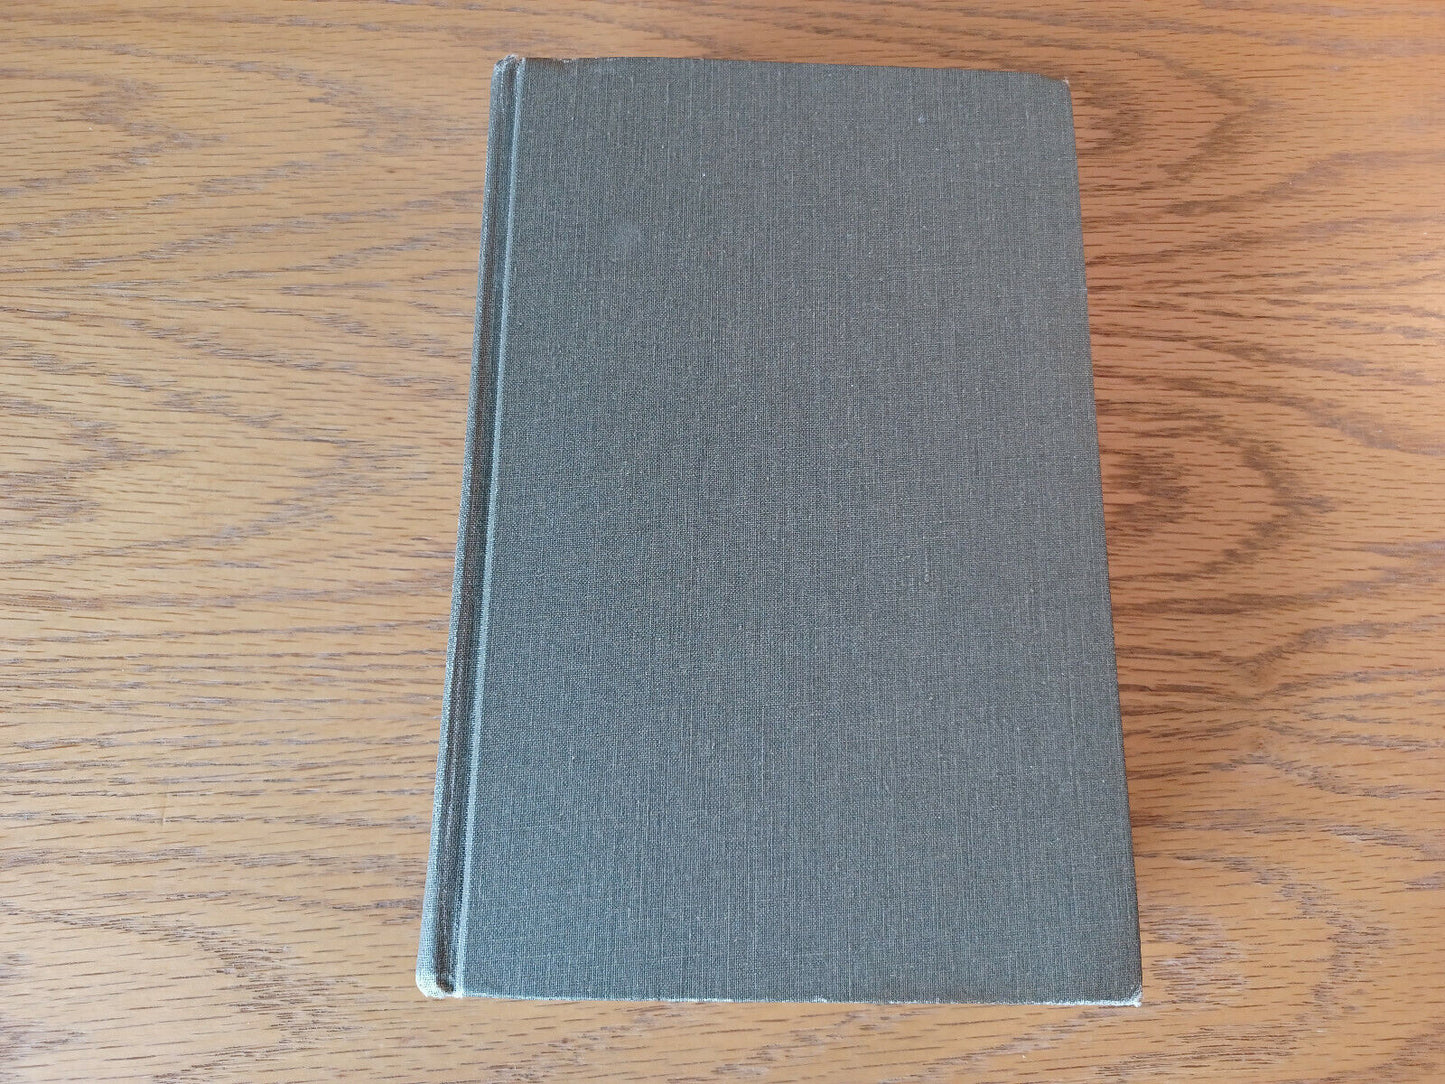 The New Oxford Annotated Bible RSV Holy Bible 1973 Hardcover Revised Standard V